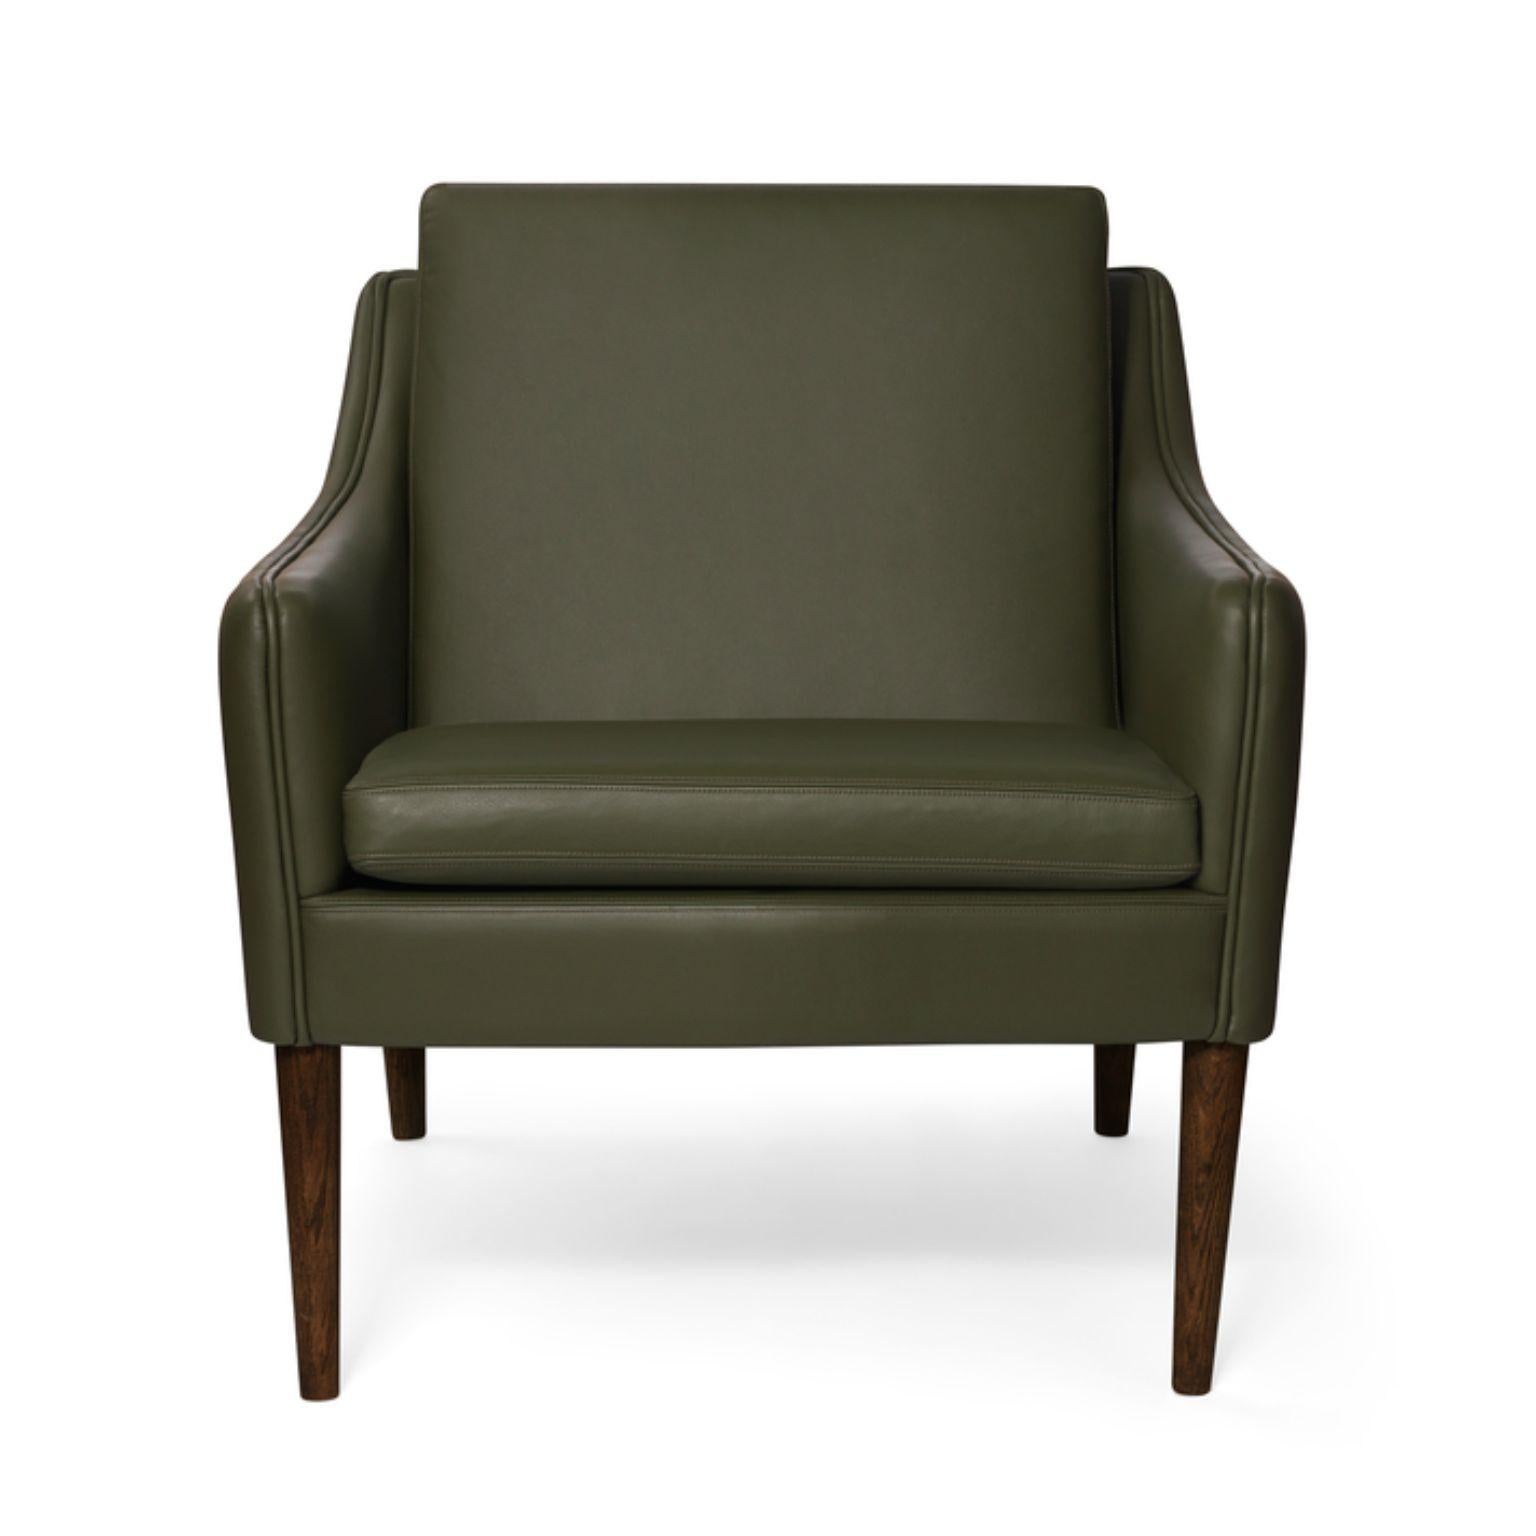 Mr. Olsen lounge chair solid walnut pickle green leather by Warm Nordic
Dimensions: D81 x W79 x H 78 cm
Material: Textile upholstery, Foam, Spring system, Oak, Leather, Walnut
Weight: 27 kg
Also available in different colours, materials and